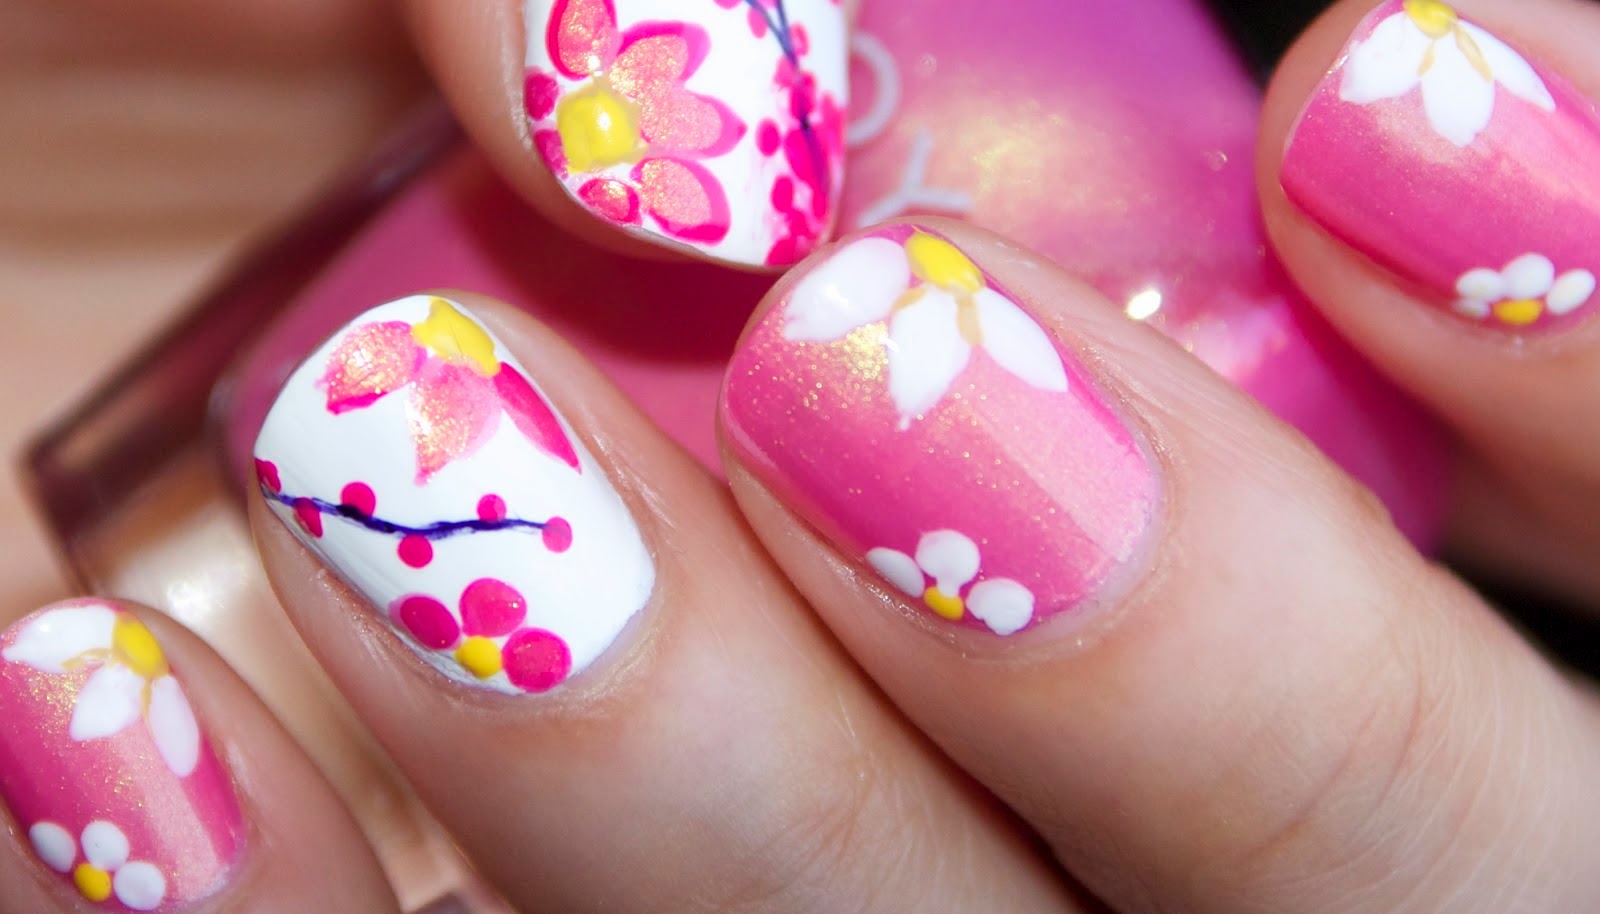 7. Step by Step Guide to Floral Nail Art - wide 1